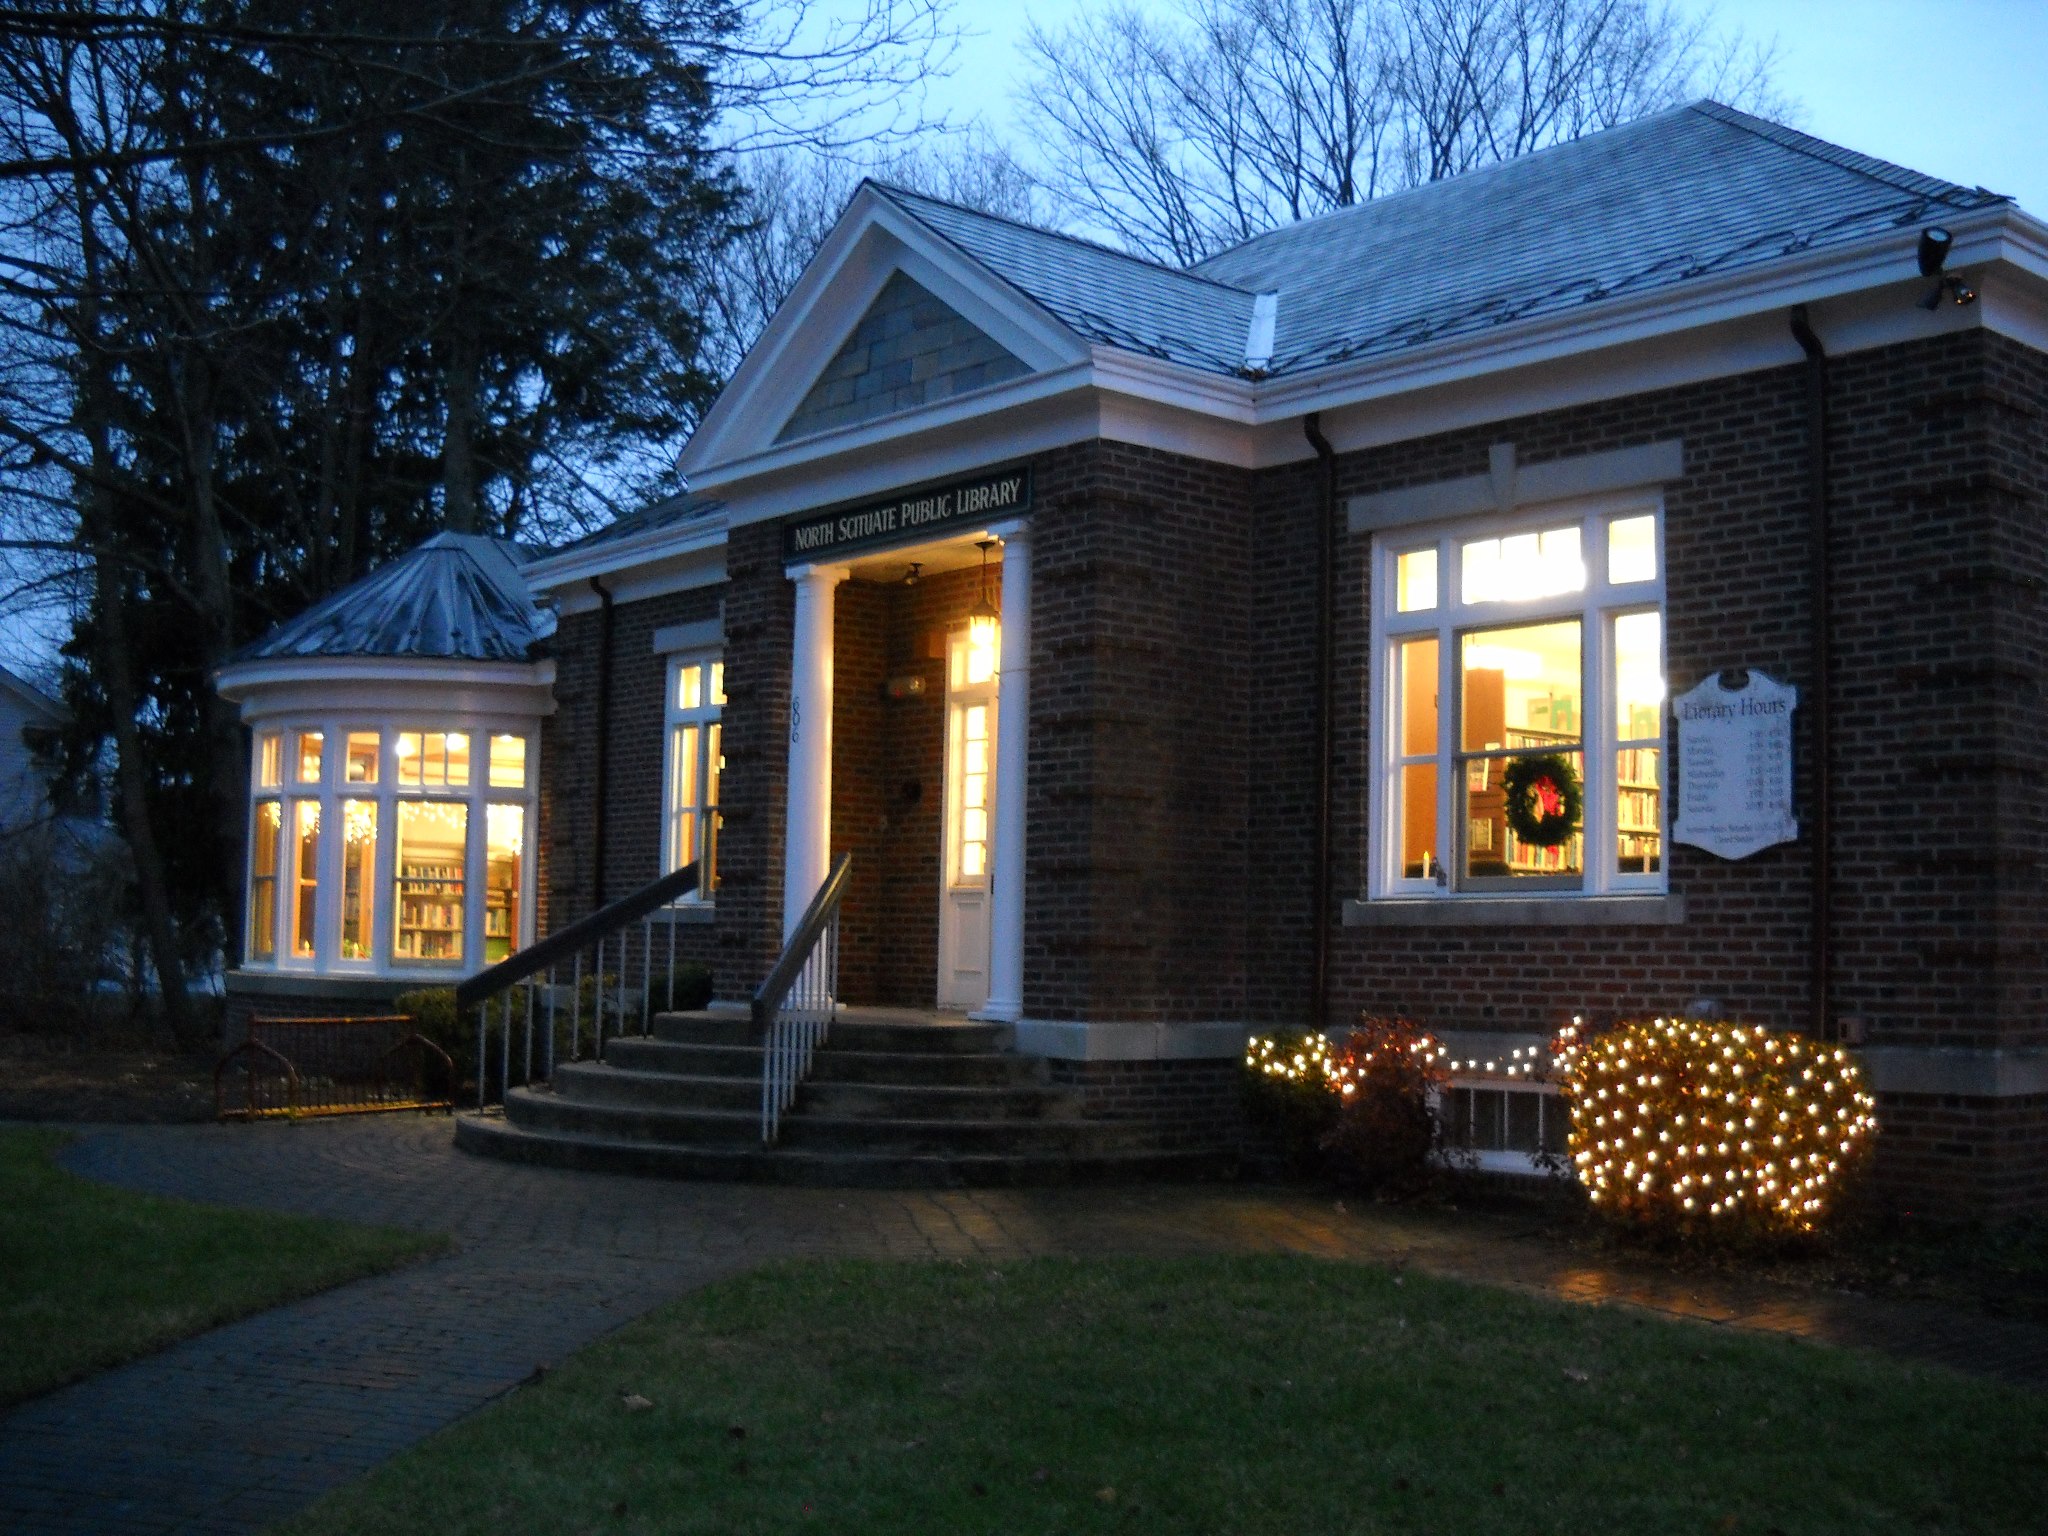 North Scituate Public Library